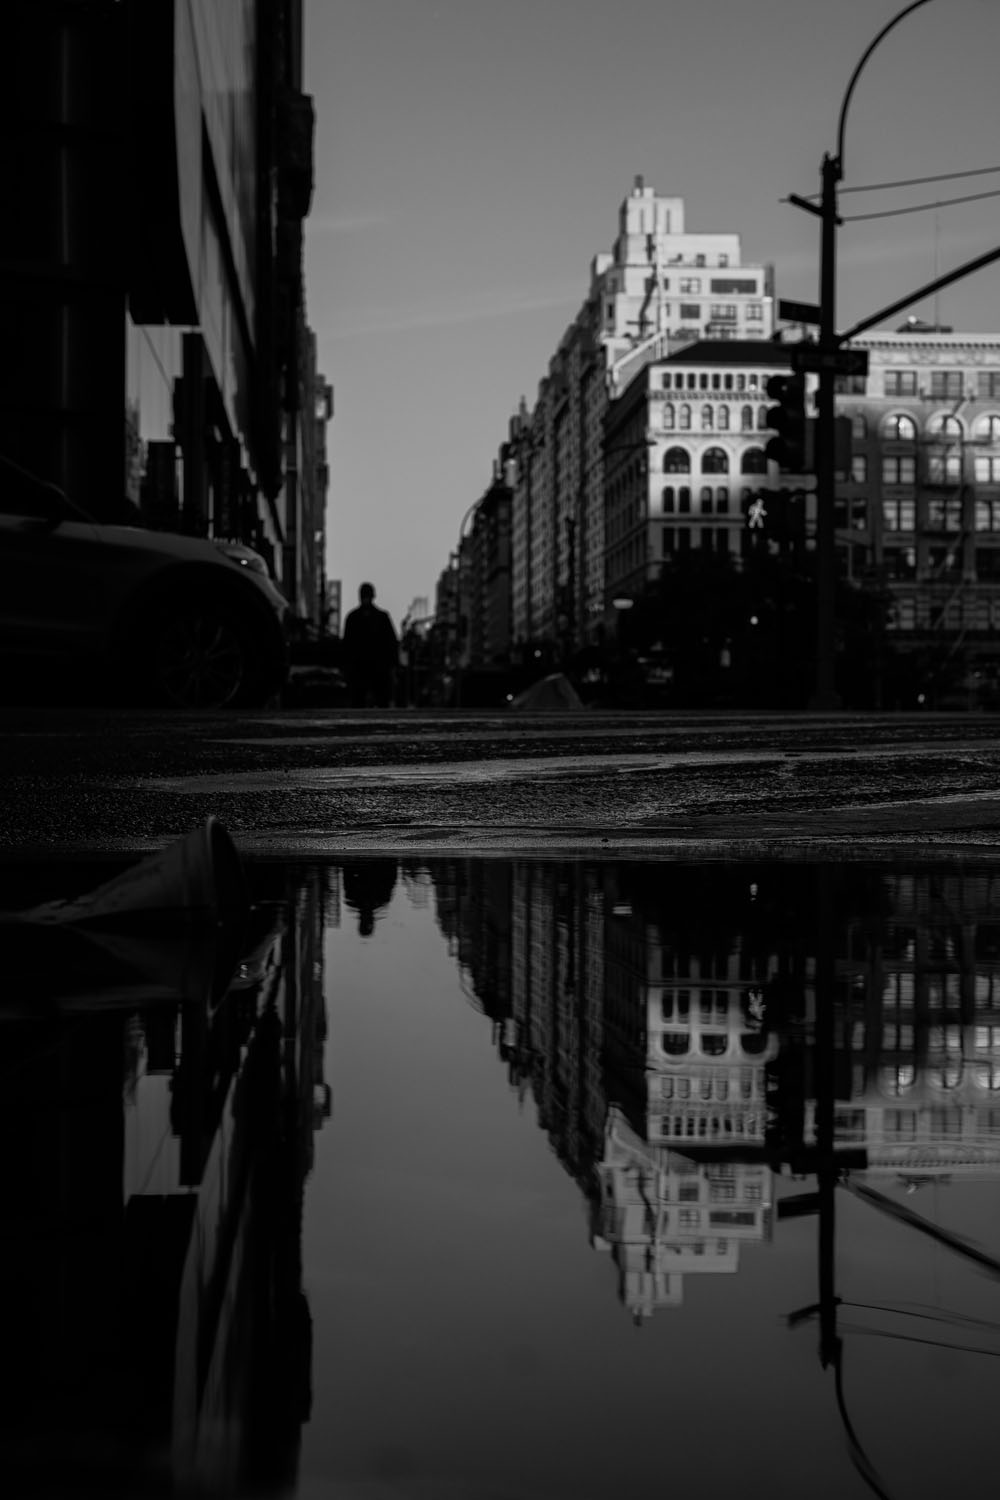 Reflection of city street in puddle